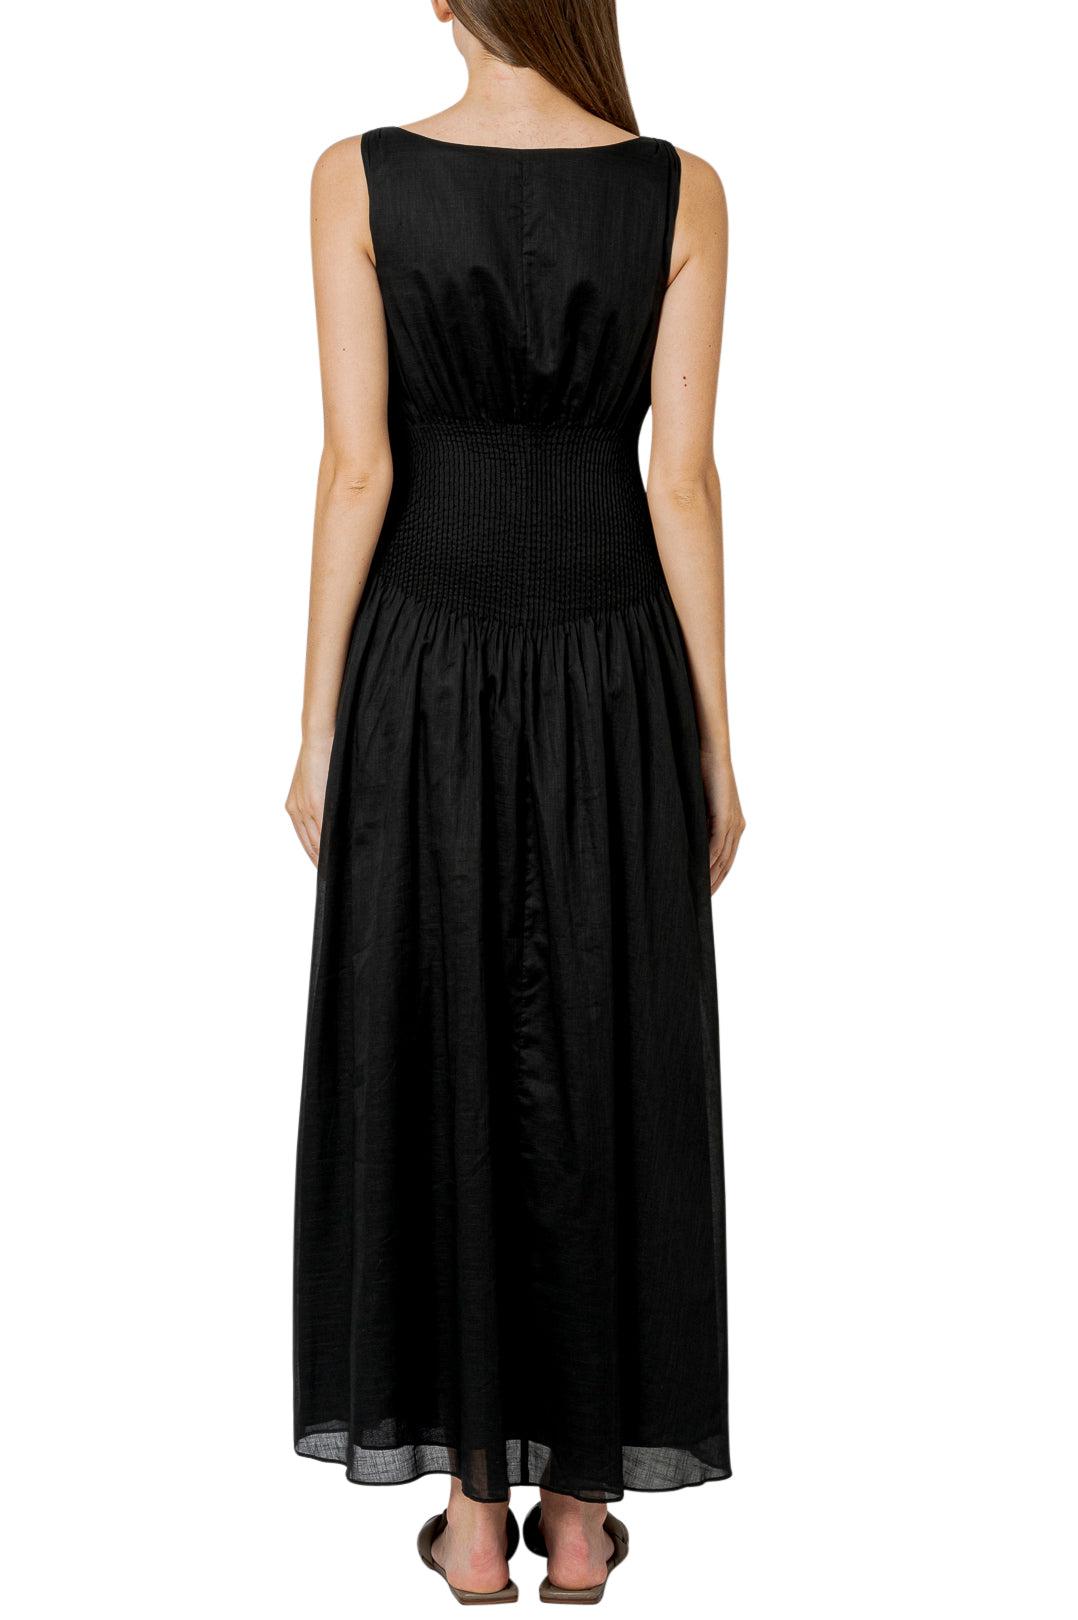 Sir The Label-Stretch long dress-dgallerystore